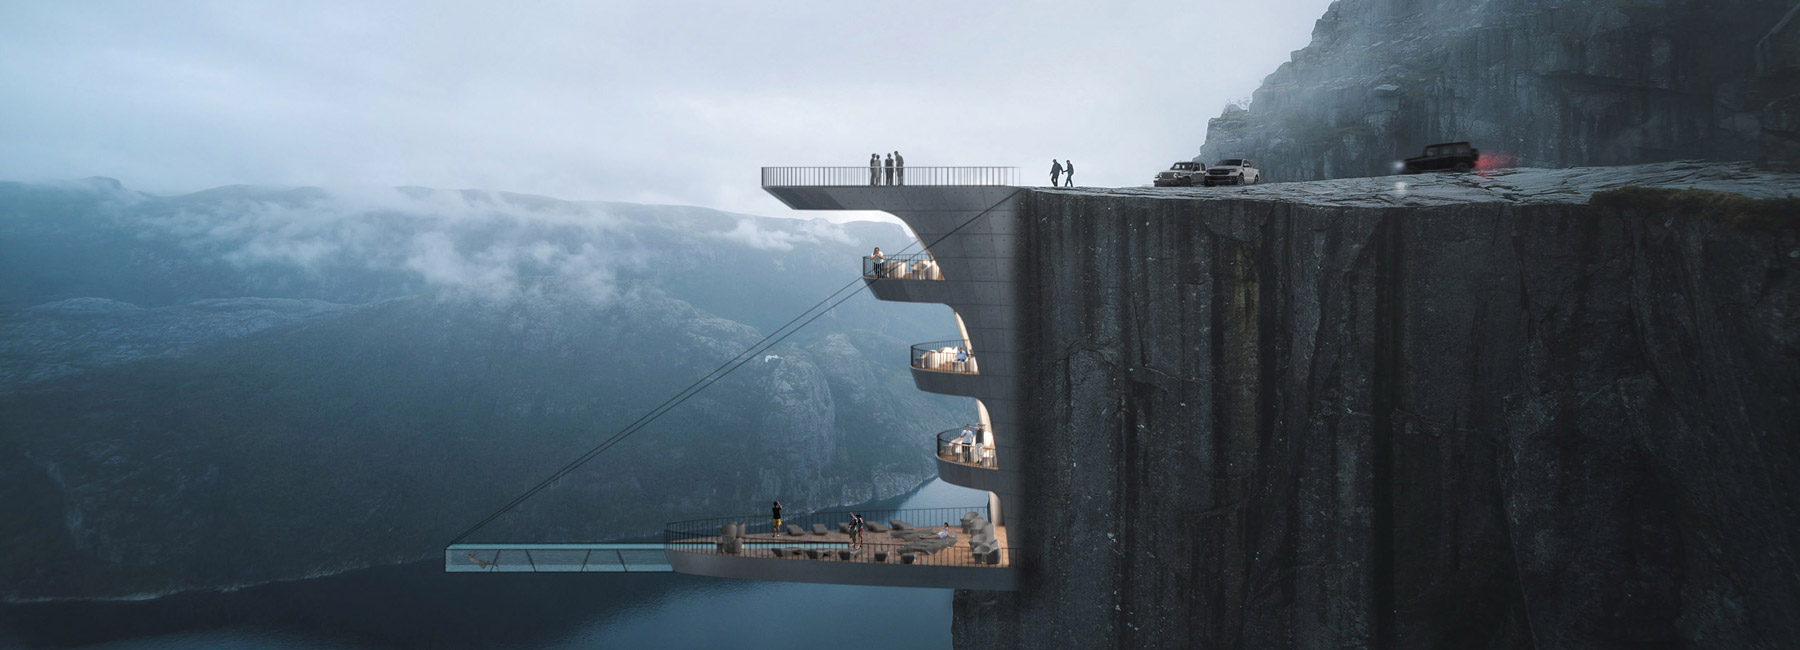 hayri atak envisions a boutique hotel suspended over a cliff edge in norway